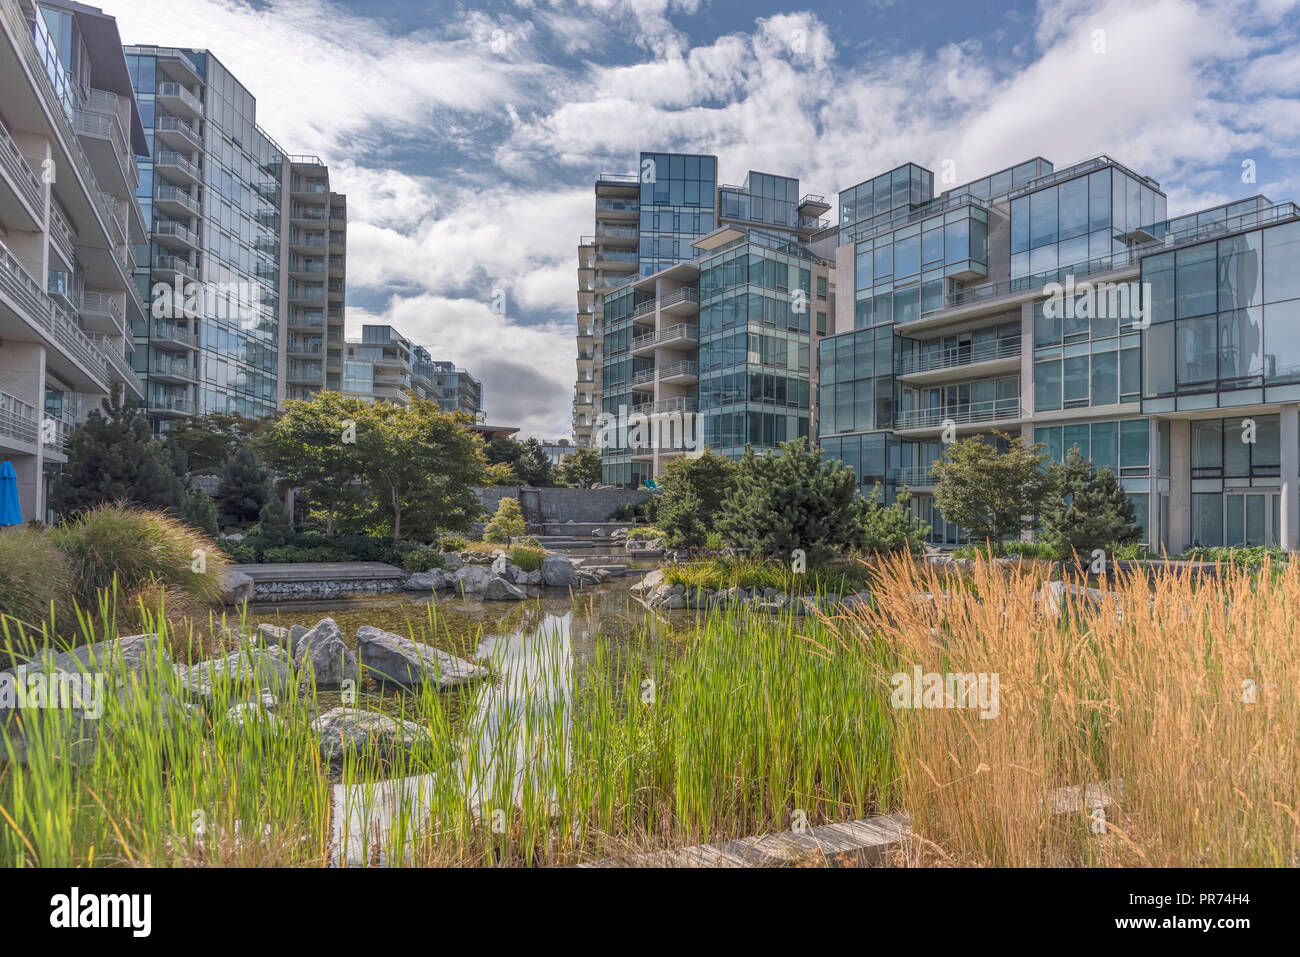 pond with stones, trees and bushes surrounded by new, modern high-rise residential buildings, a blue sky and white clouds in the back Stock Photo